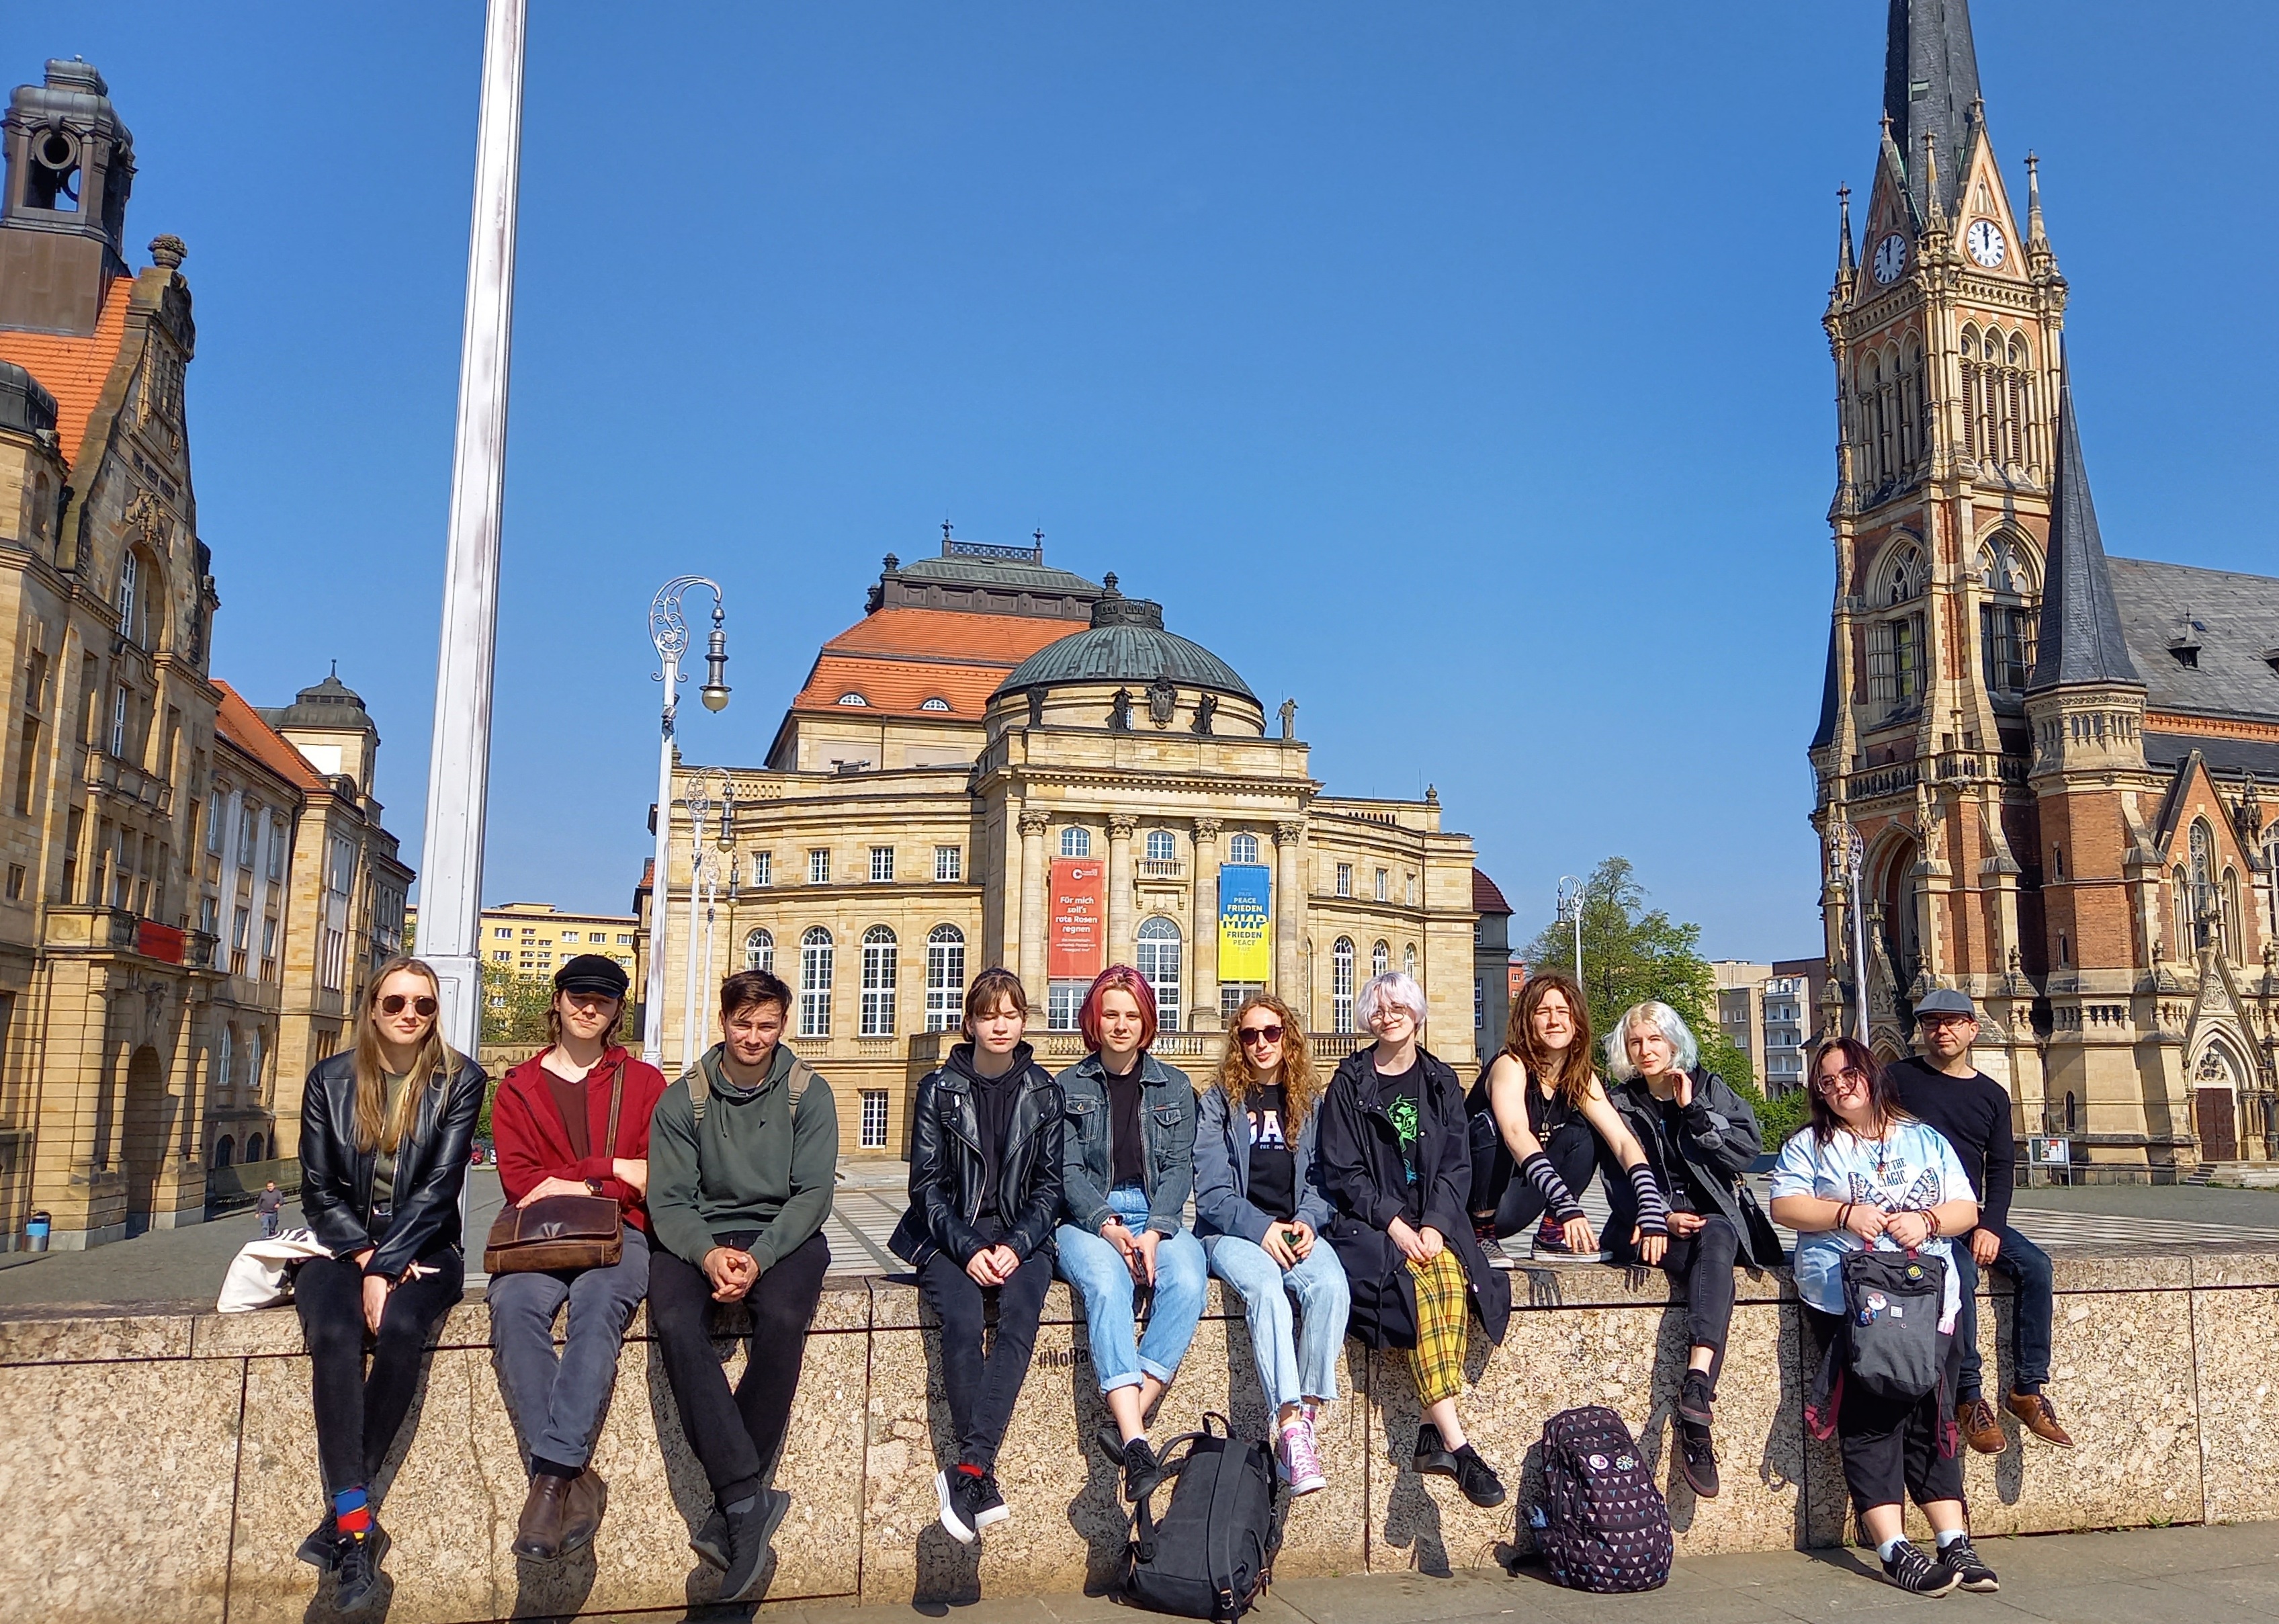 The Lithuanian group explored the city in Chemnitz.